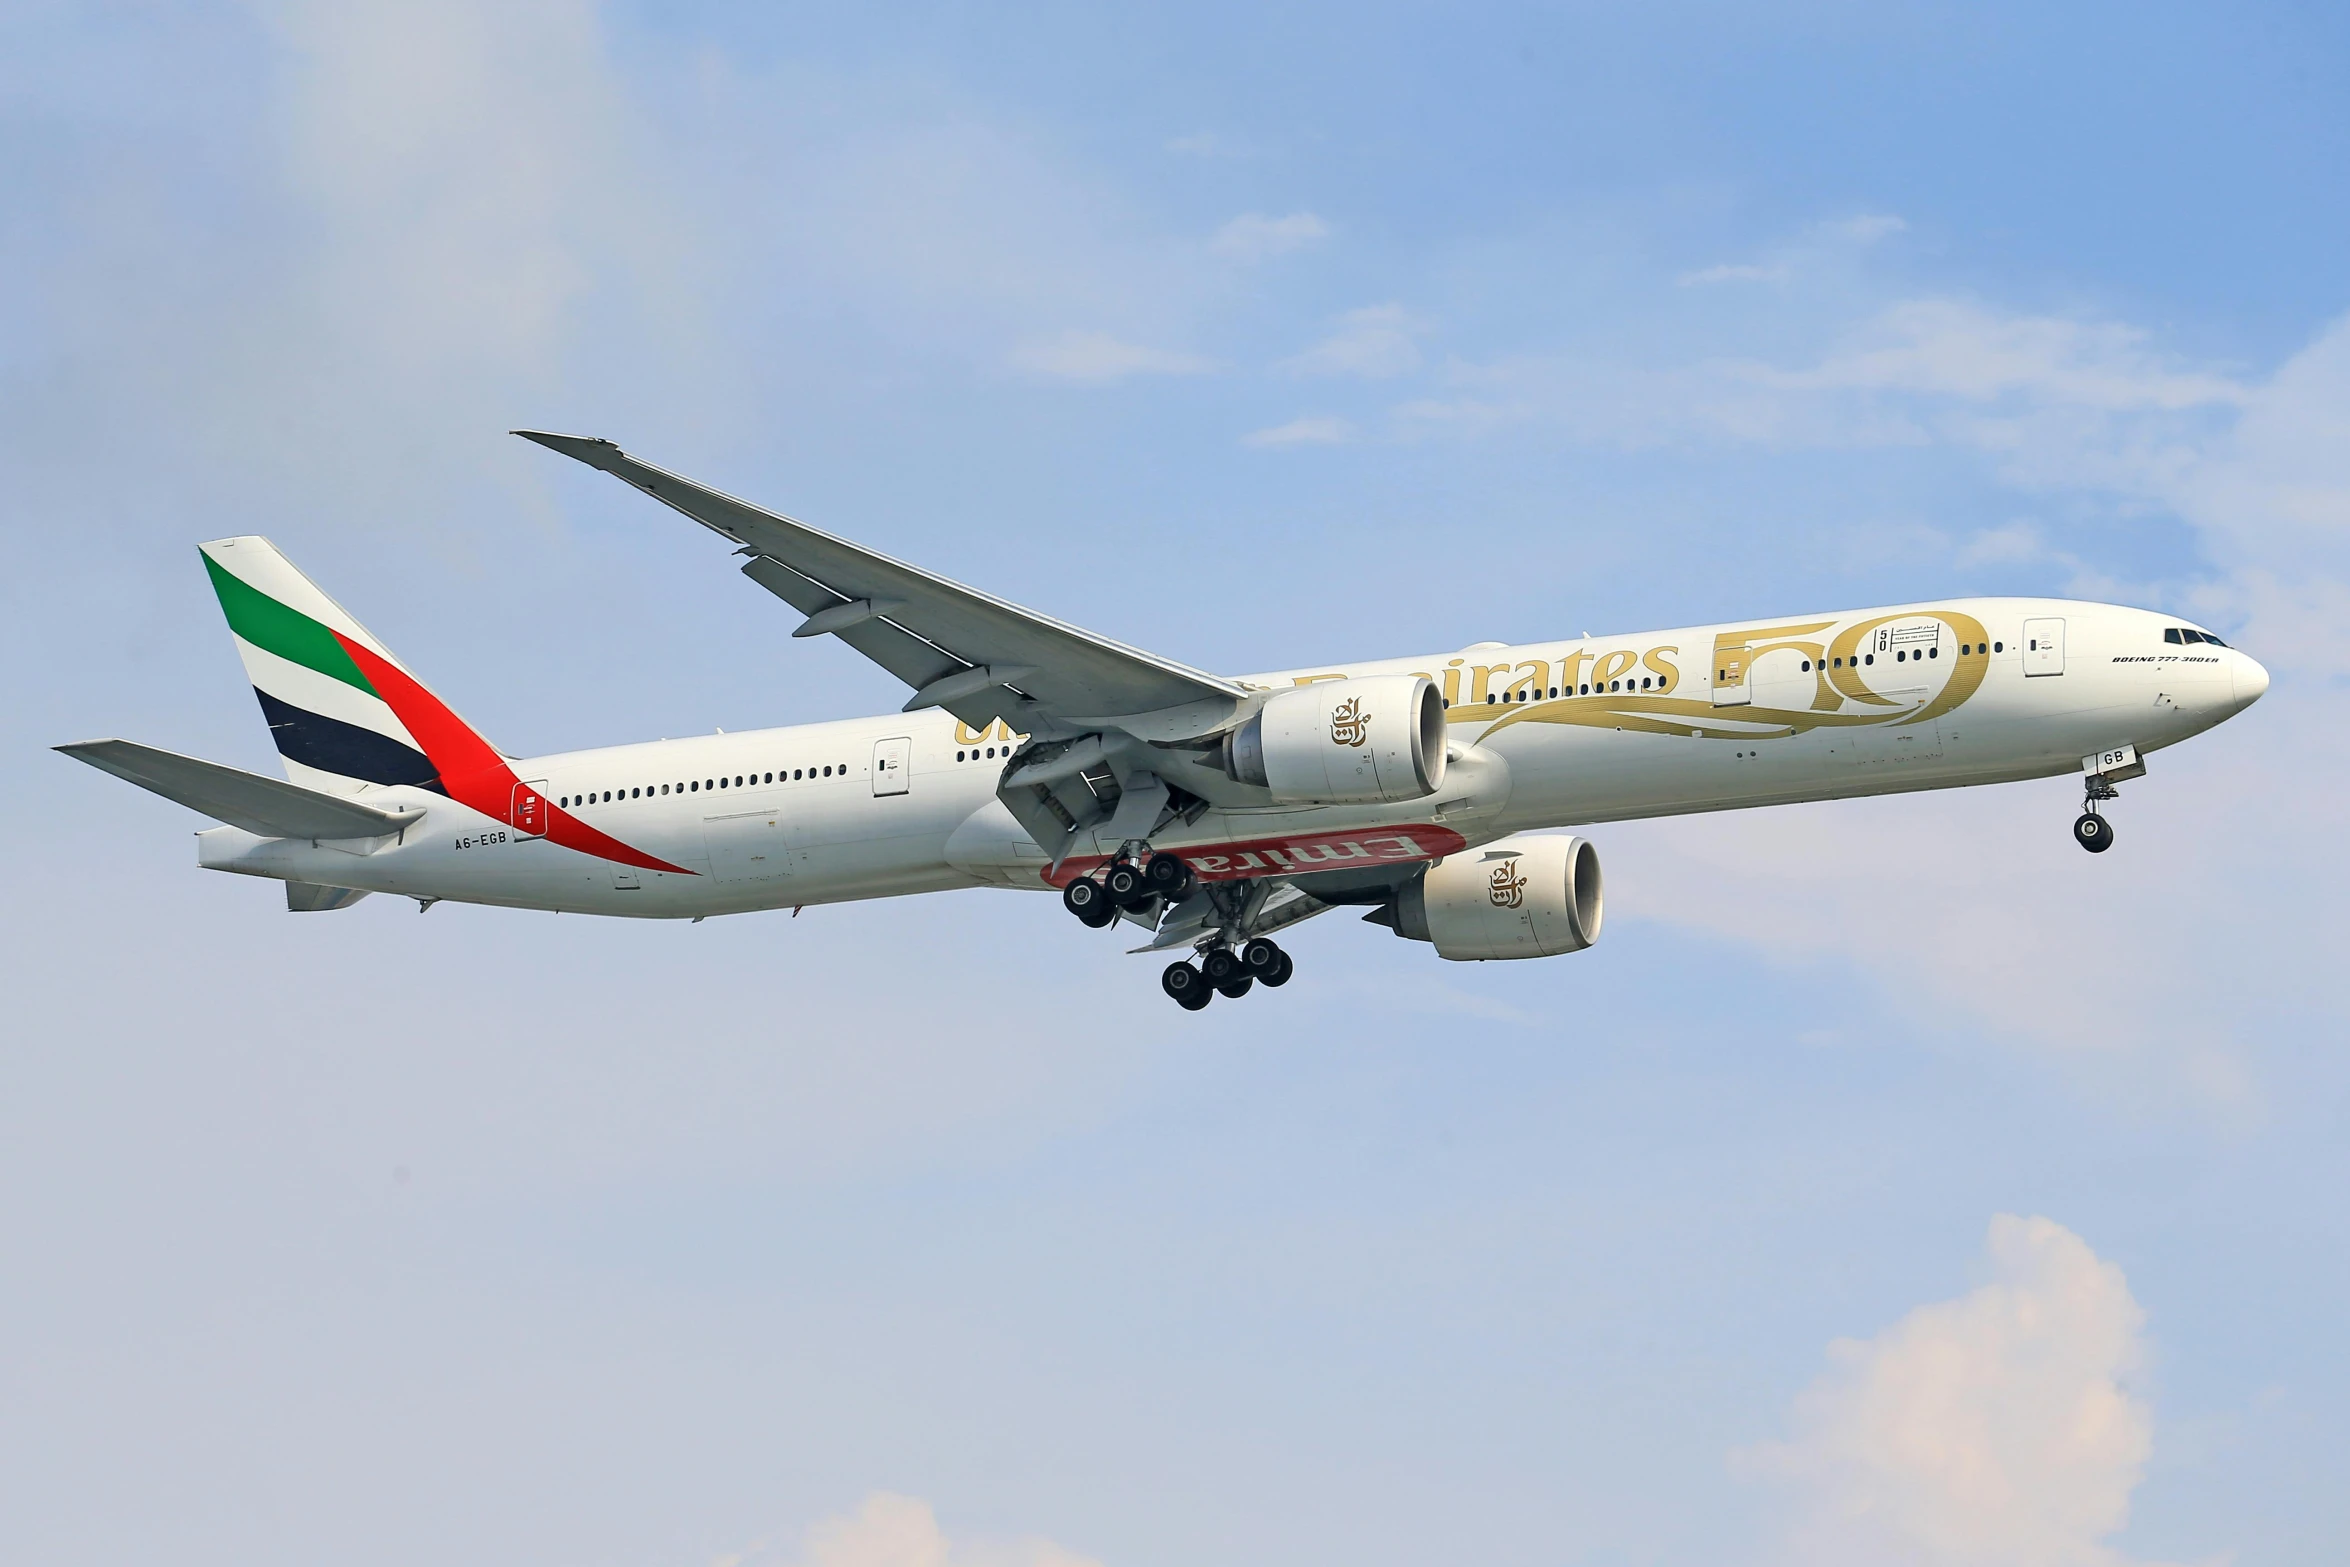 a large passenger jet flying through a blue sky, a picture, arabesque, gold and red accents, long tails, advanced economy, golden eal